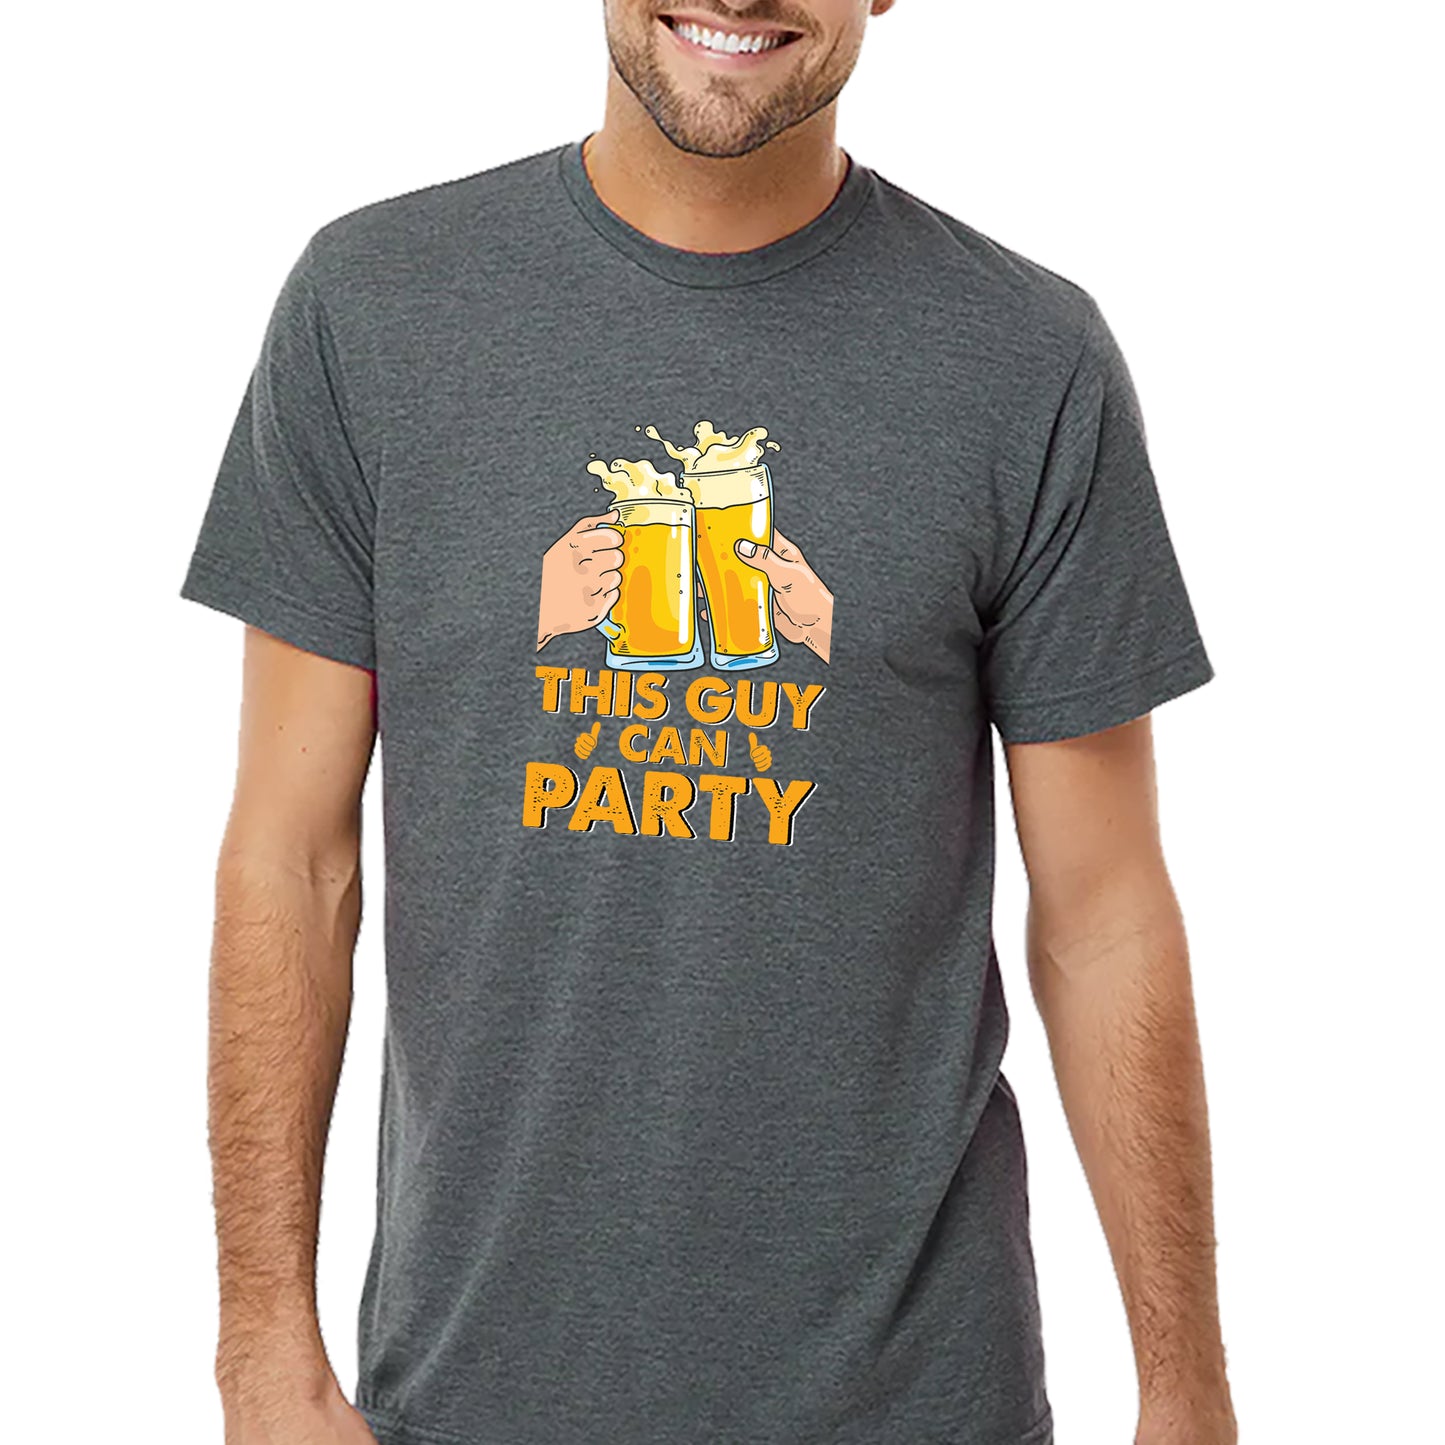 This Guy Can Party T-shirt